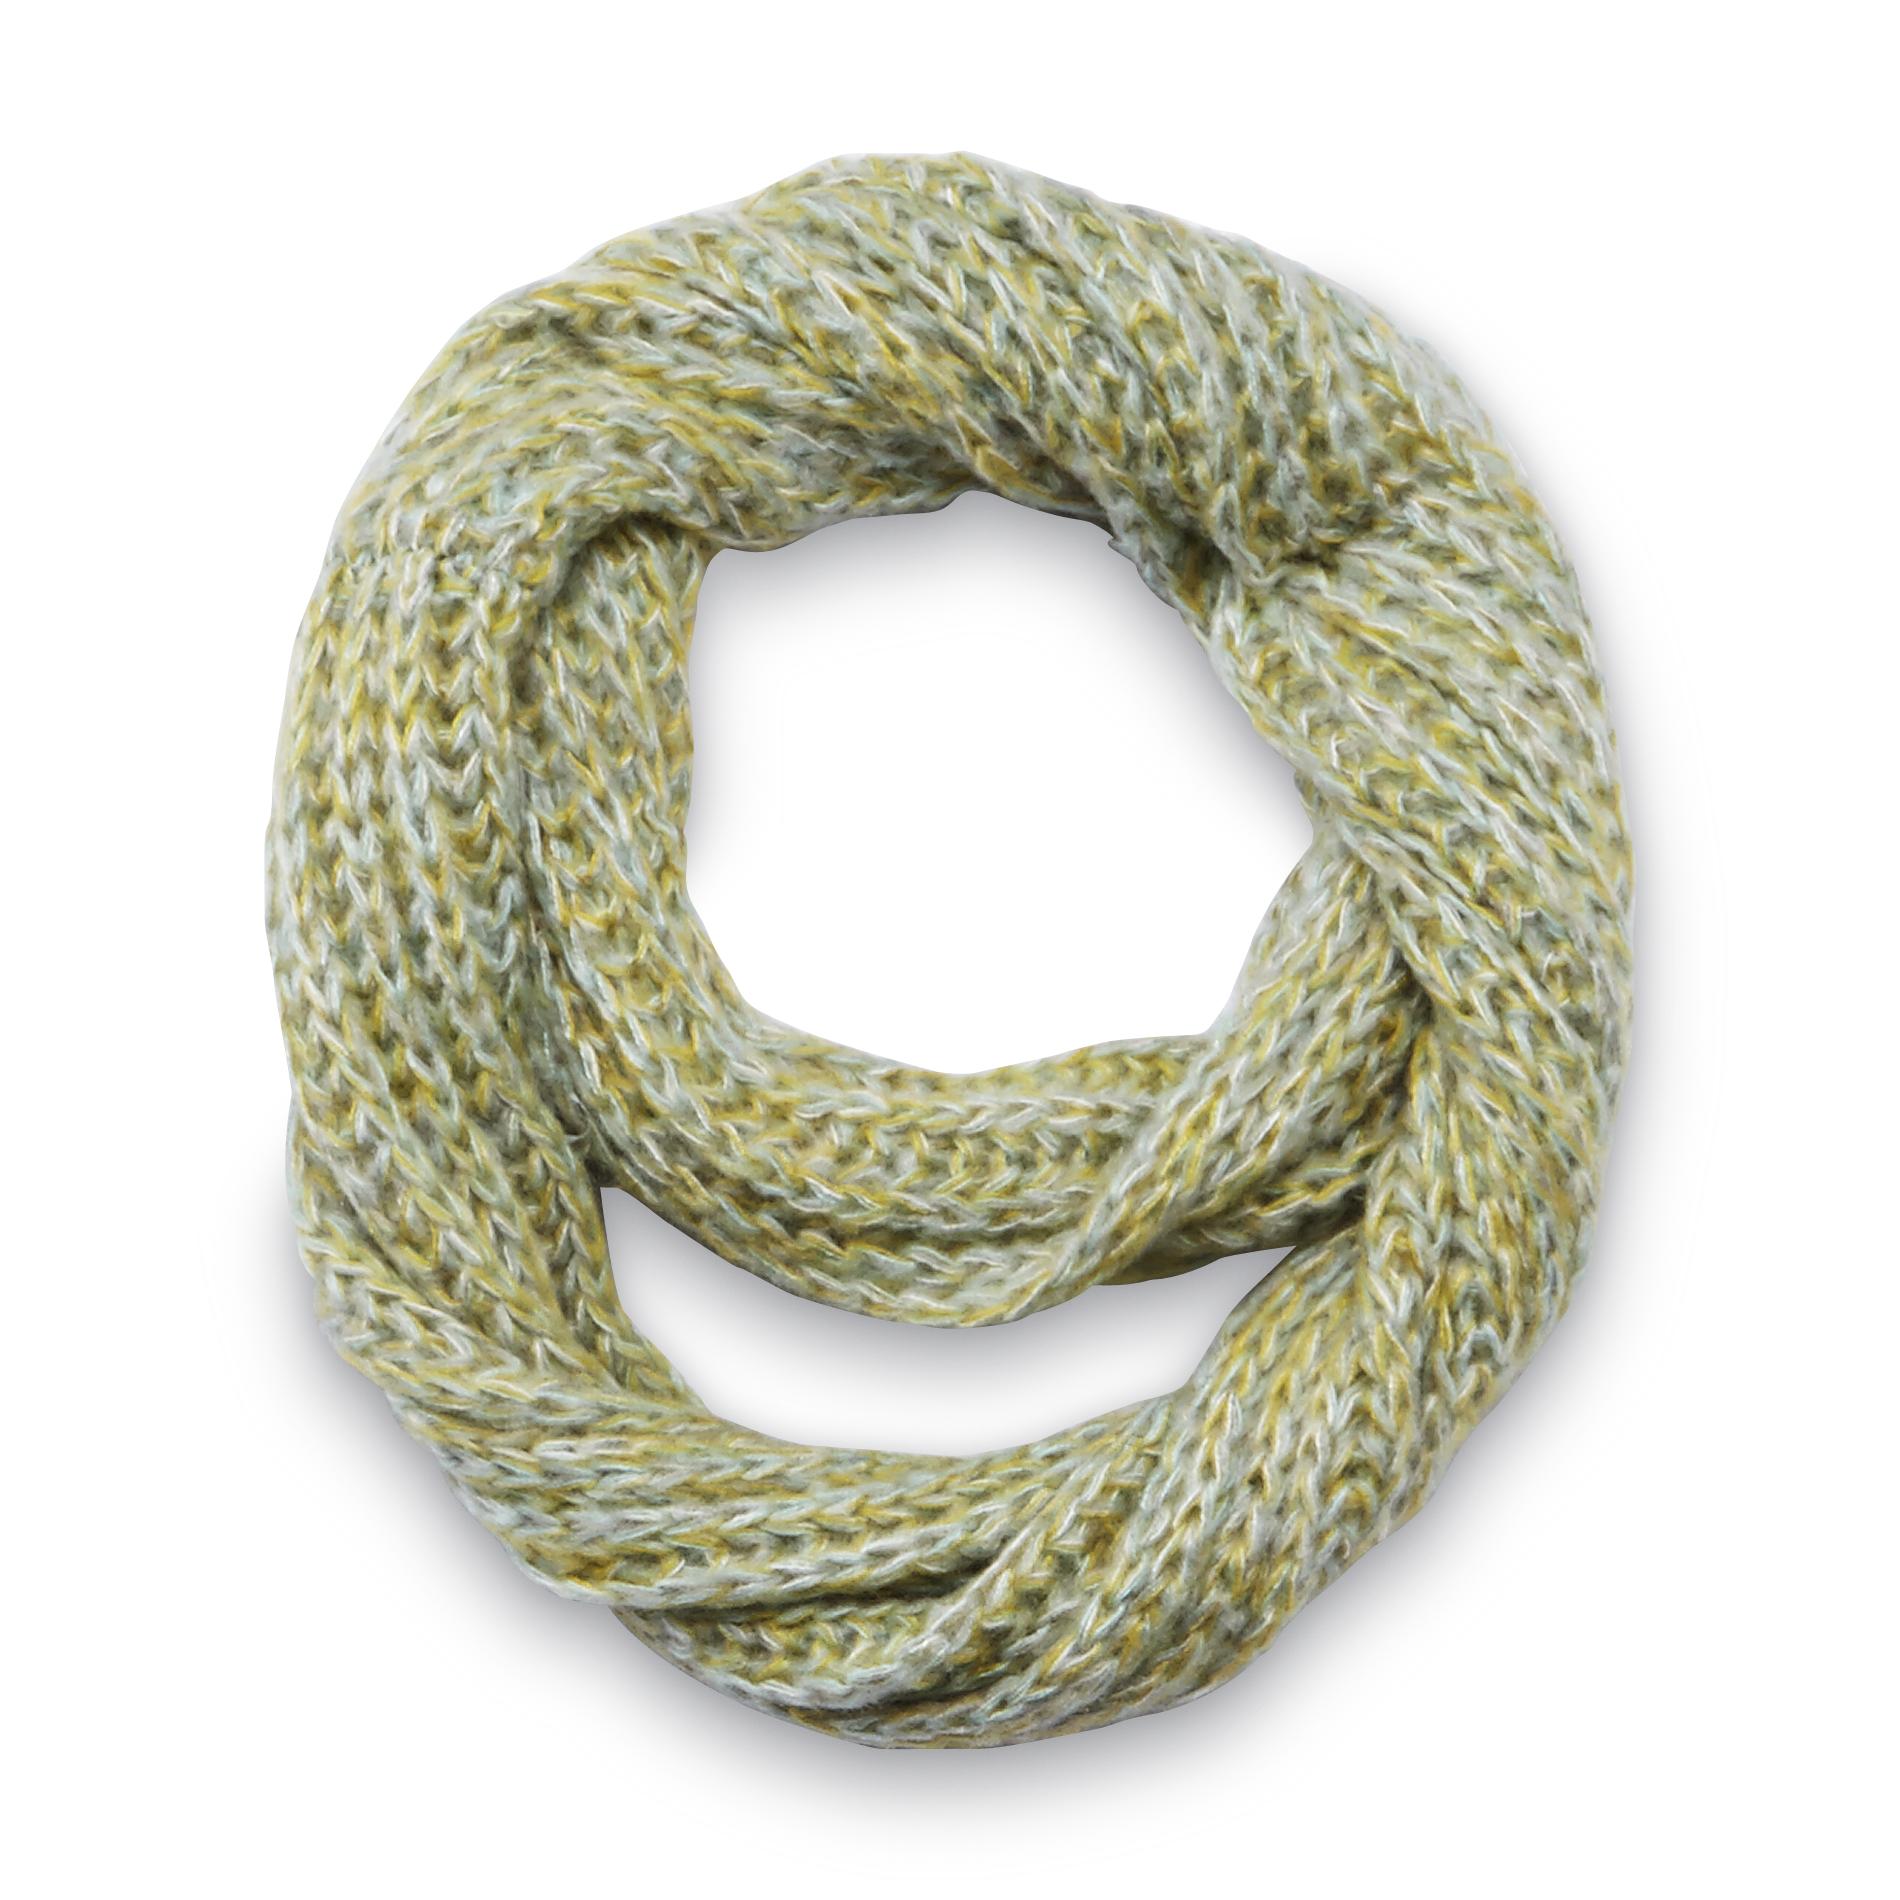 Joe Boxer Women's Marled Cable Knit Infinity Scarf